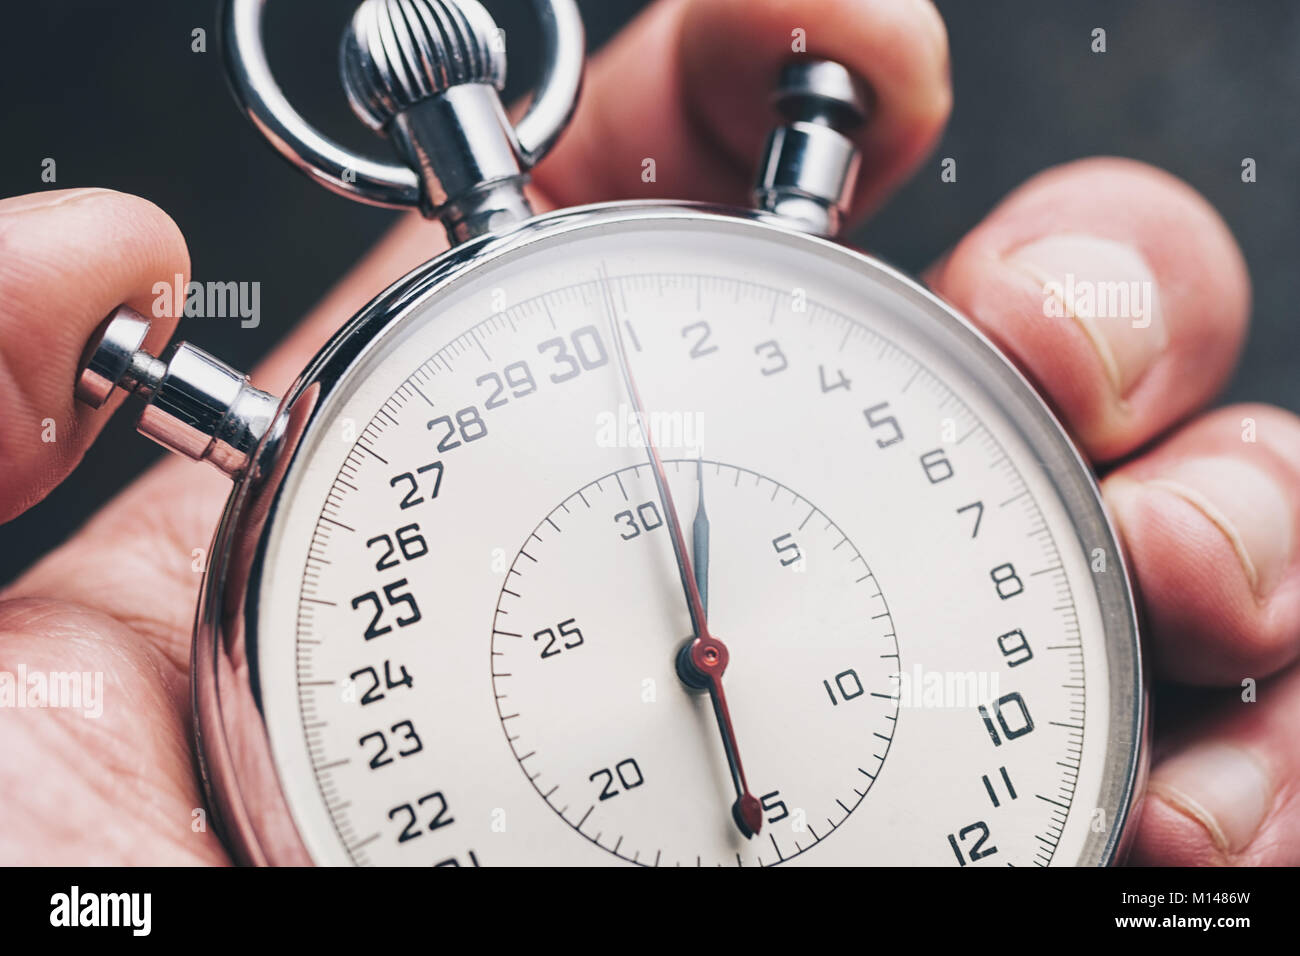 close view of a male hand holding a stopwatch to measure time. Stock Photo